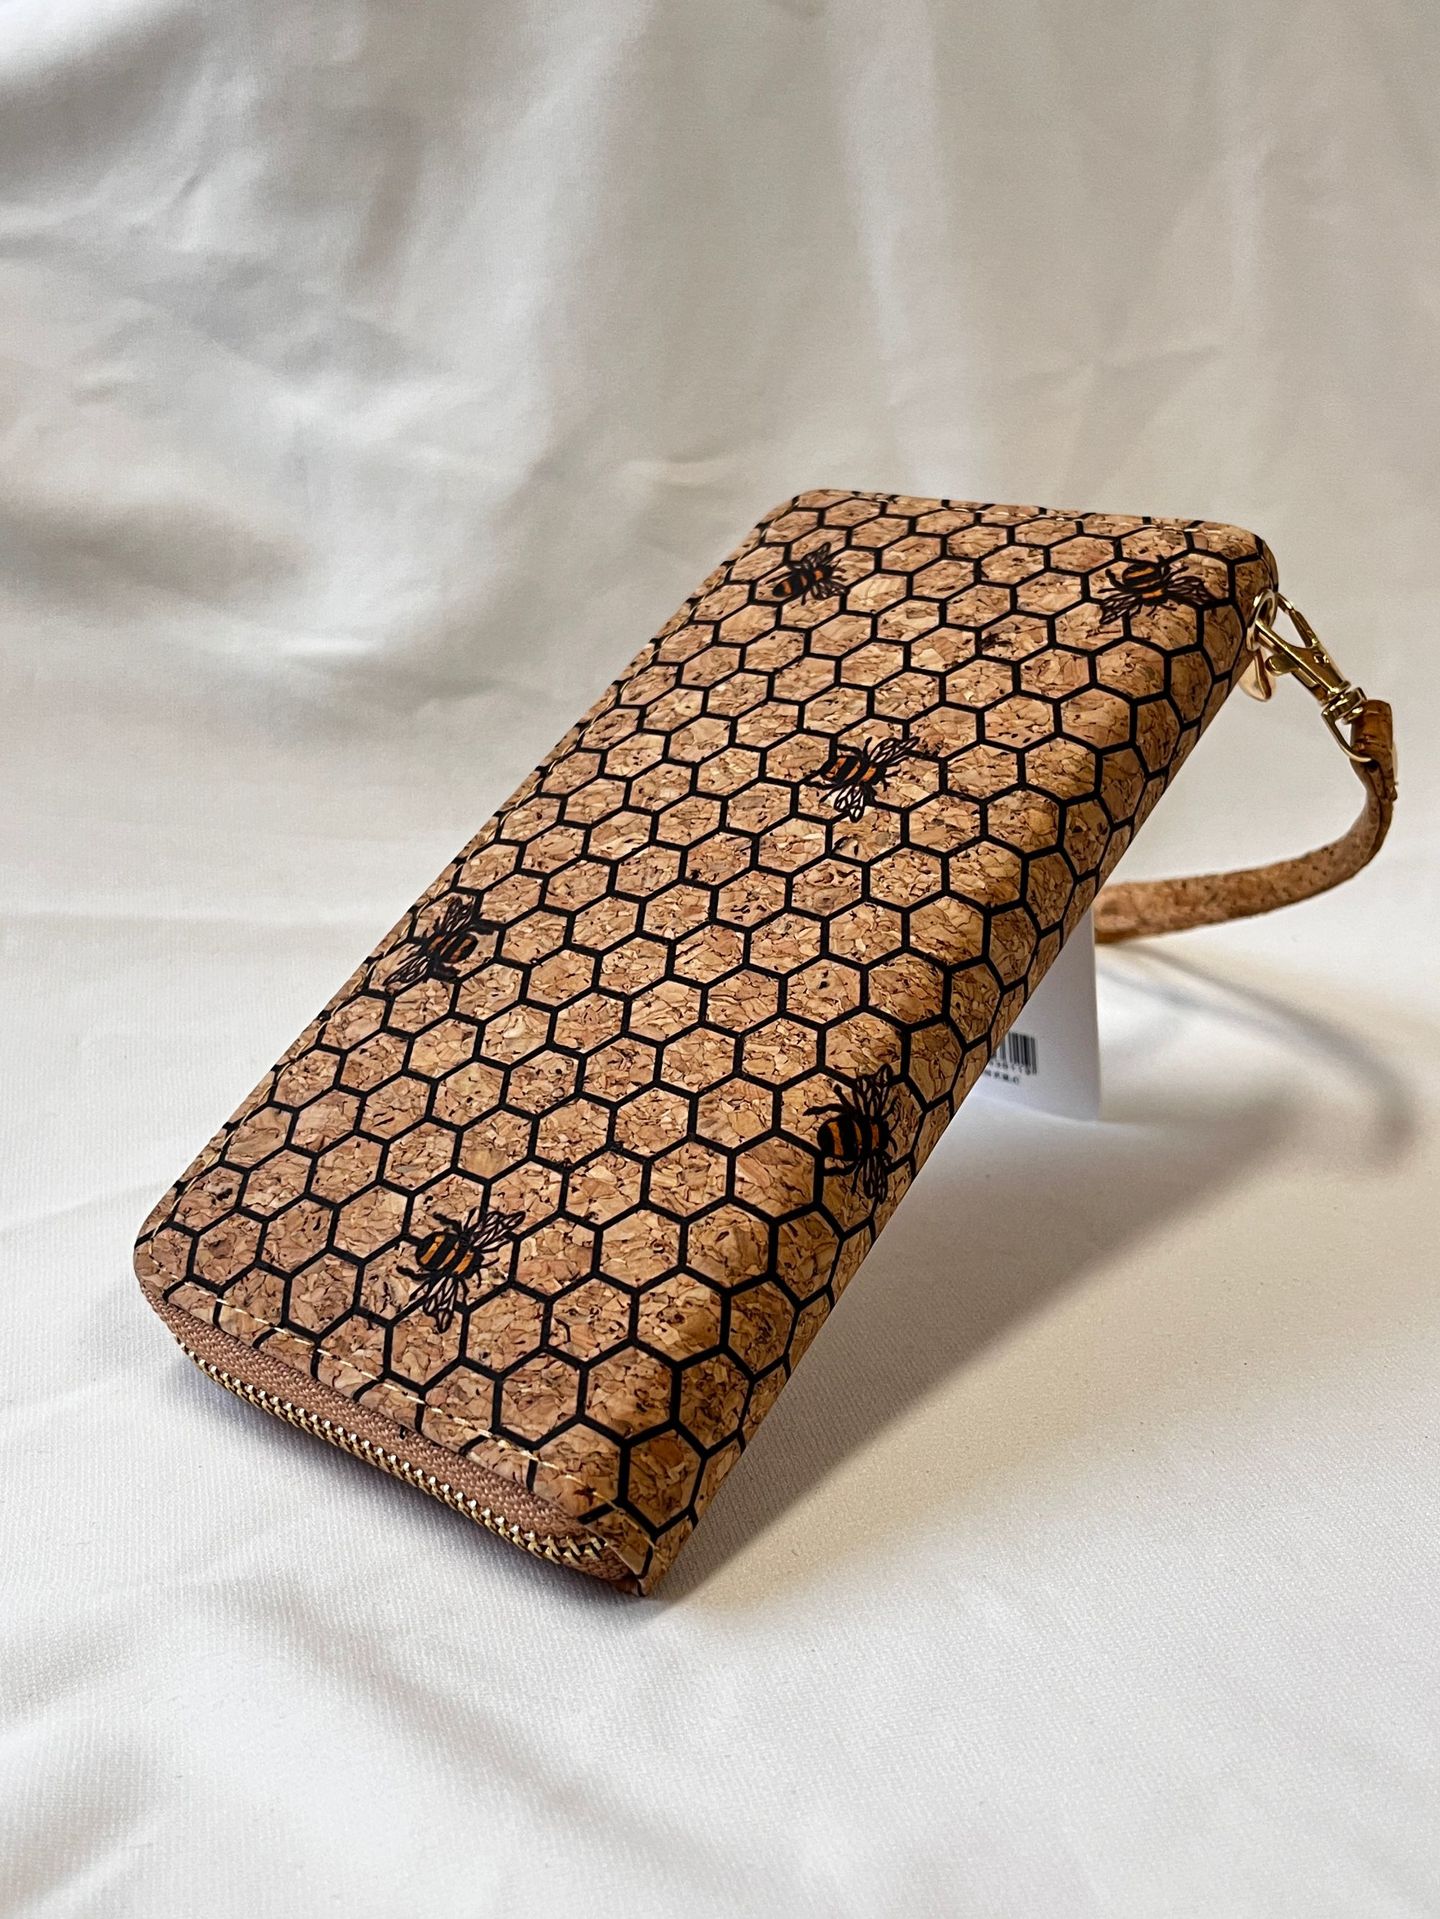 Honeycomb Printed Women's Wallet Multi-Card Card Holder Retro Simple Small Cork Coin Purse Exquisite Creative Design